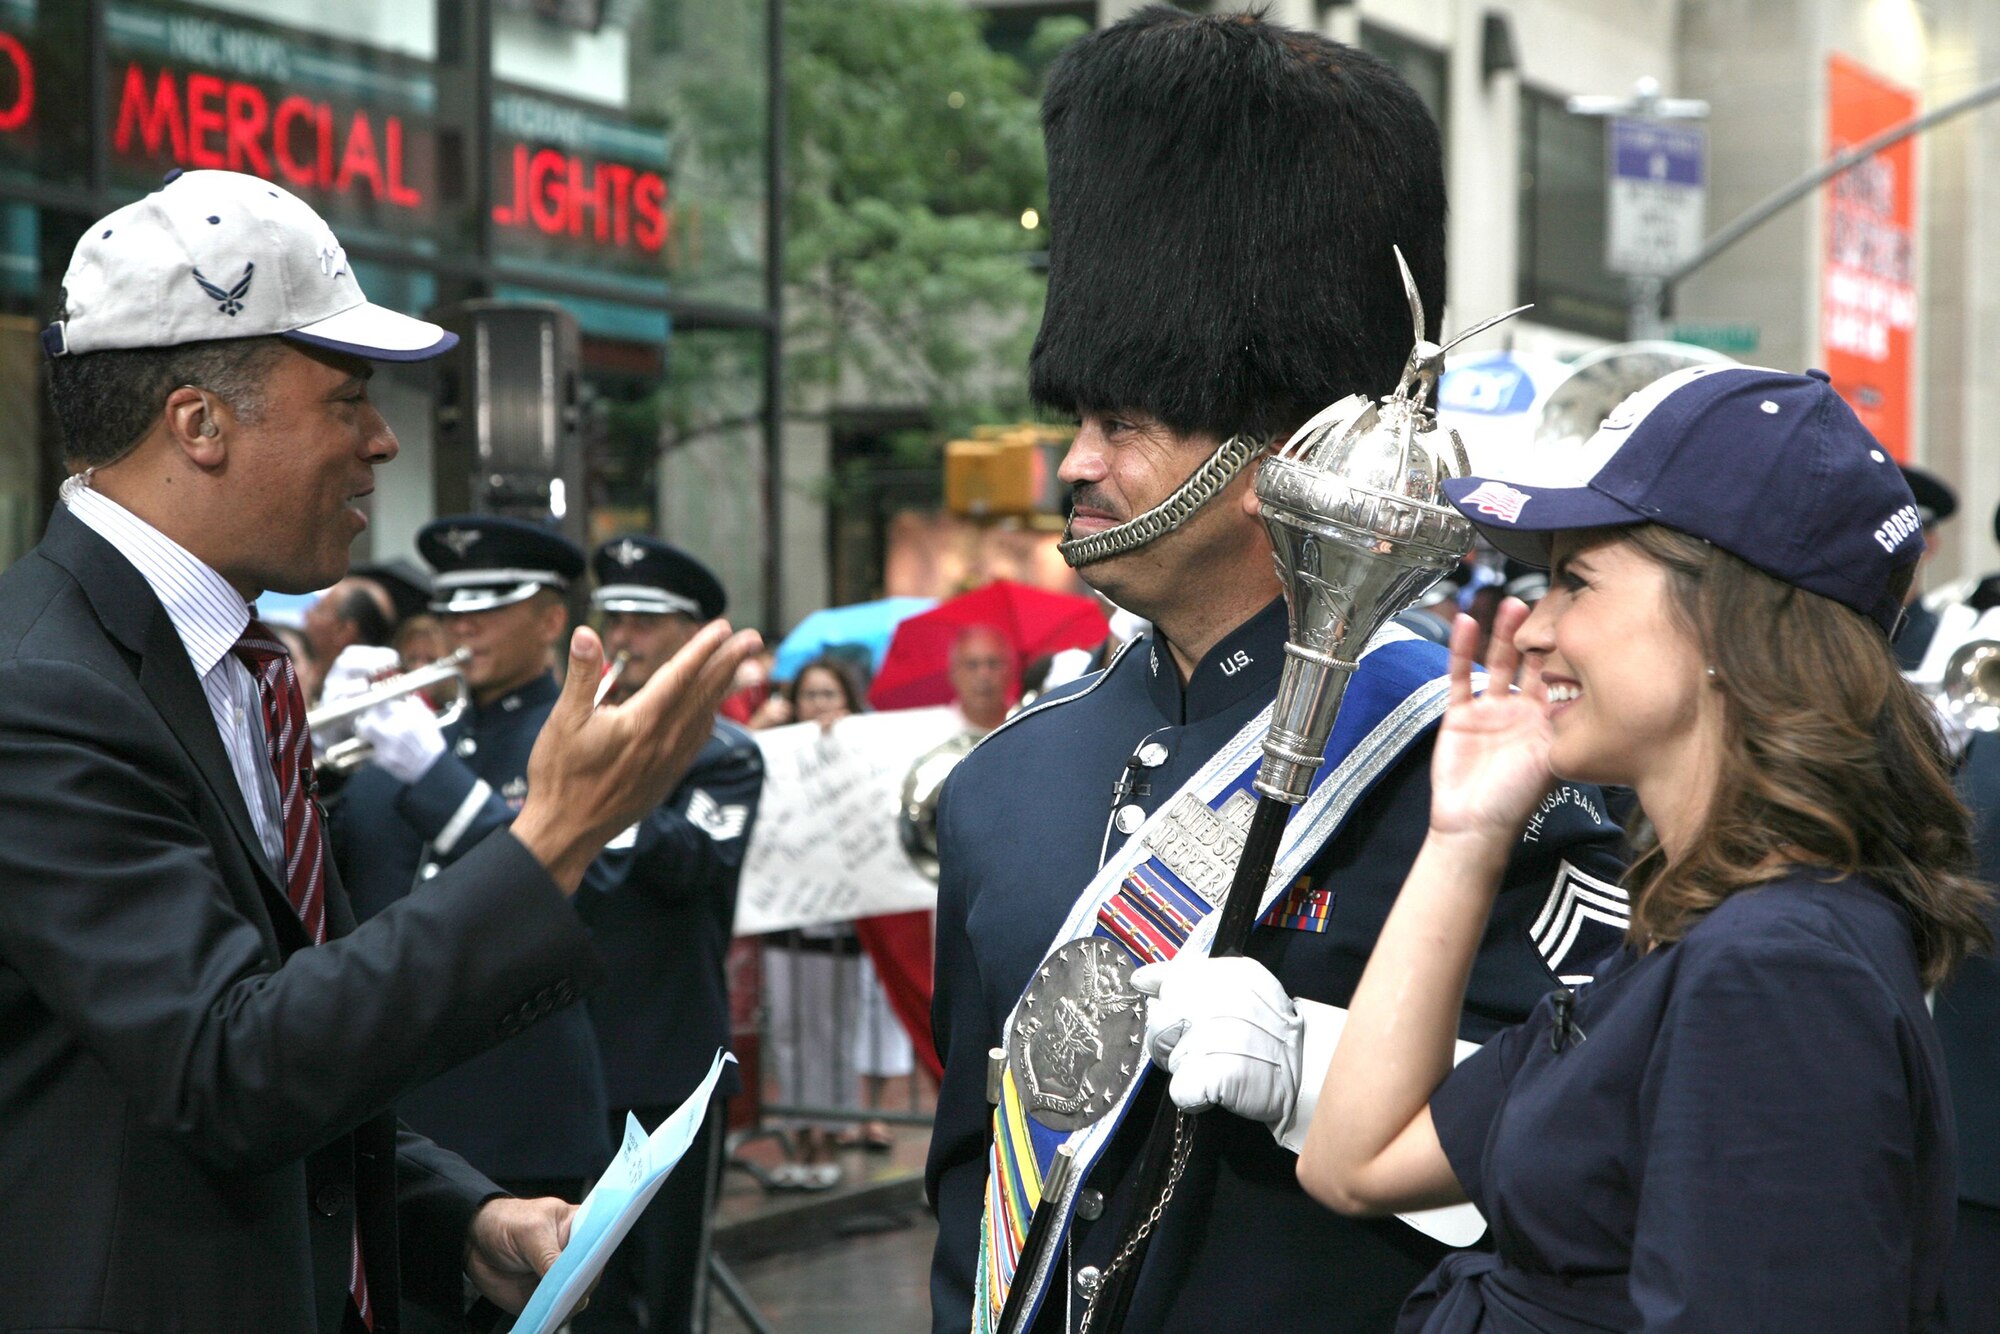 "Today" show hosts Lester Holt and Natalie Morales interview Chief Master Sgt. Ed Teleky, drum major and NCO in charge of the U.S. Air Force Band's Ceremonial Brass, July 4 during a live broadcast from Rockefeller Plaza in New York. The Ceremonial Brass has performed annually on the Today show since 1998. Both Holt and Morales are children of career Airmen. (U.S. Air Force photo by Senior Master Sgt. Robert S. Mesite)